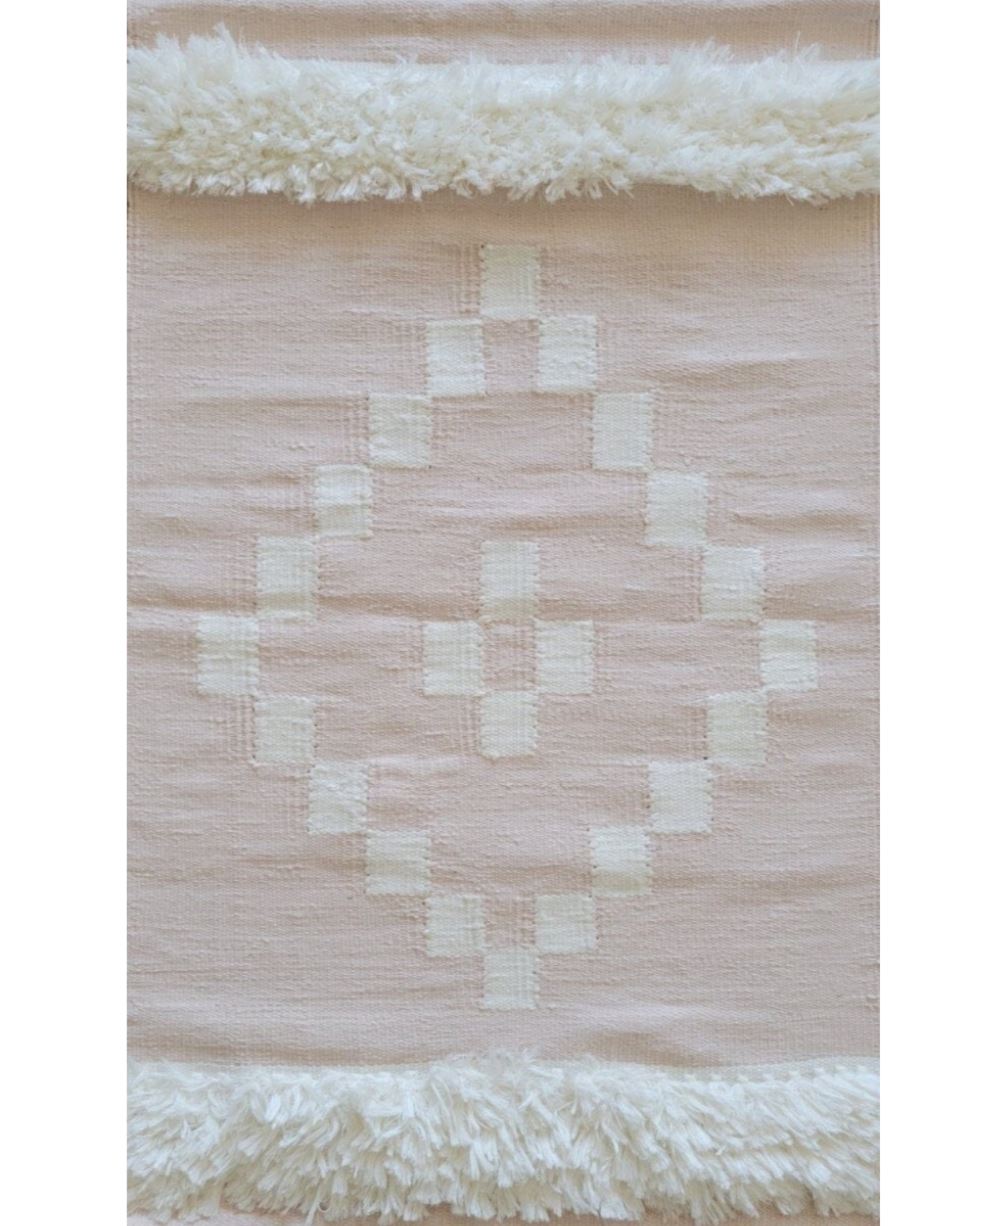 Cotton Candy Pink Handwoven Rug